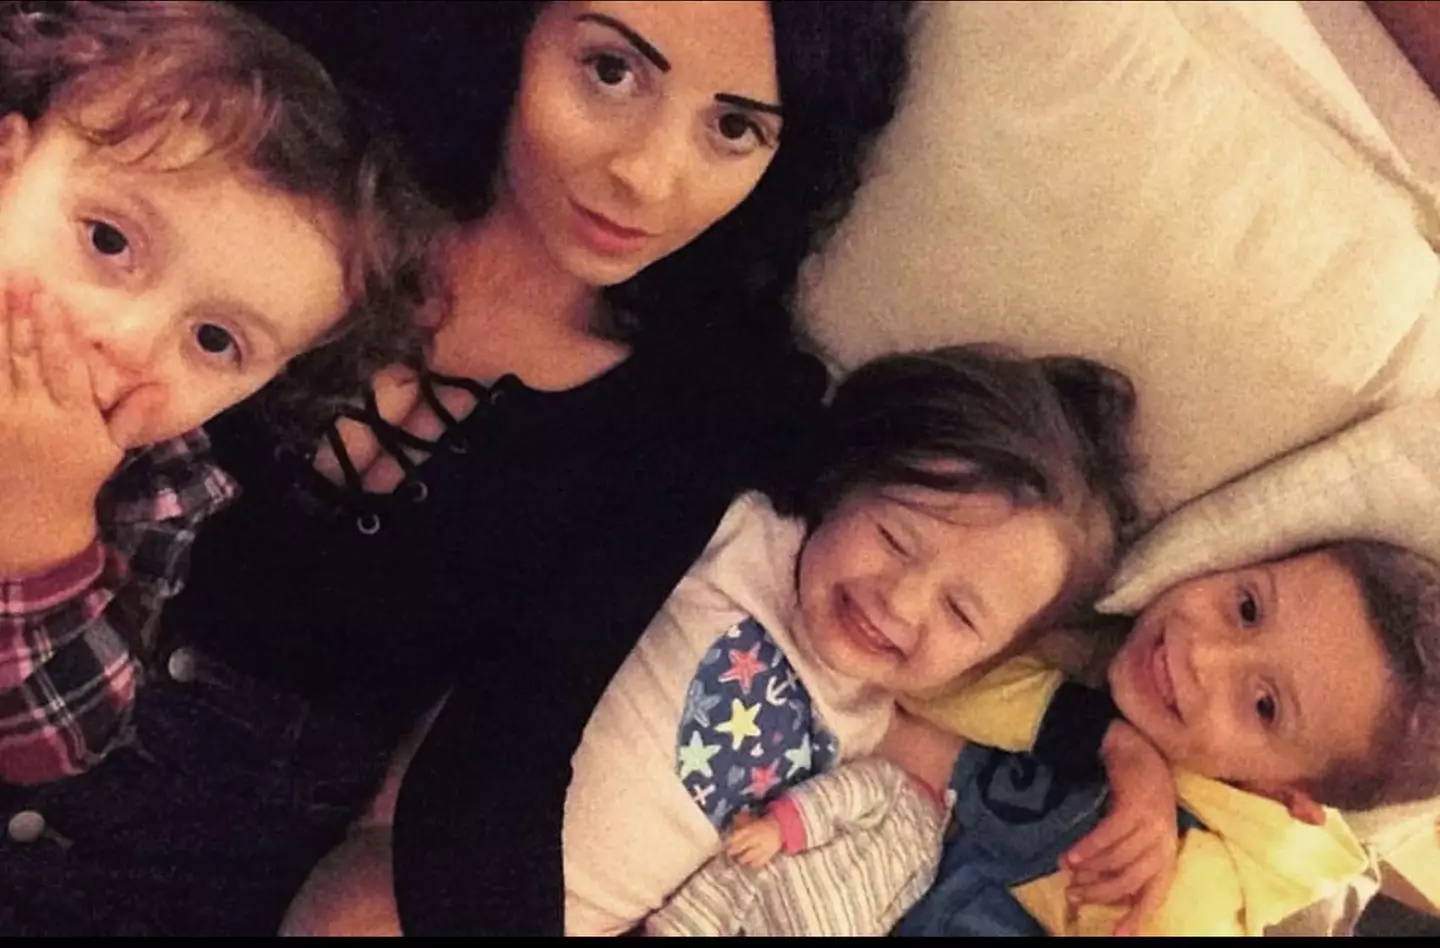 The mum of three said her life has completely changed.